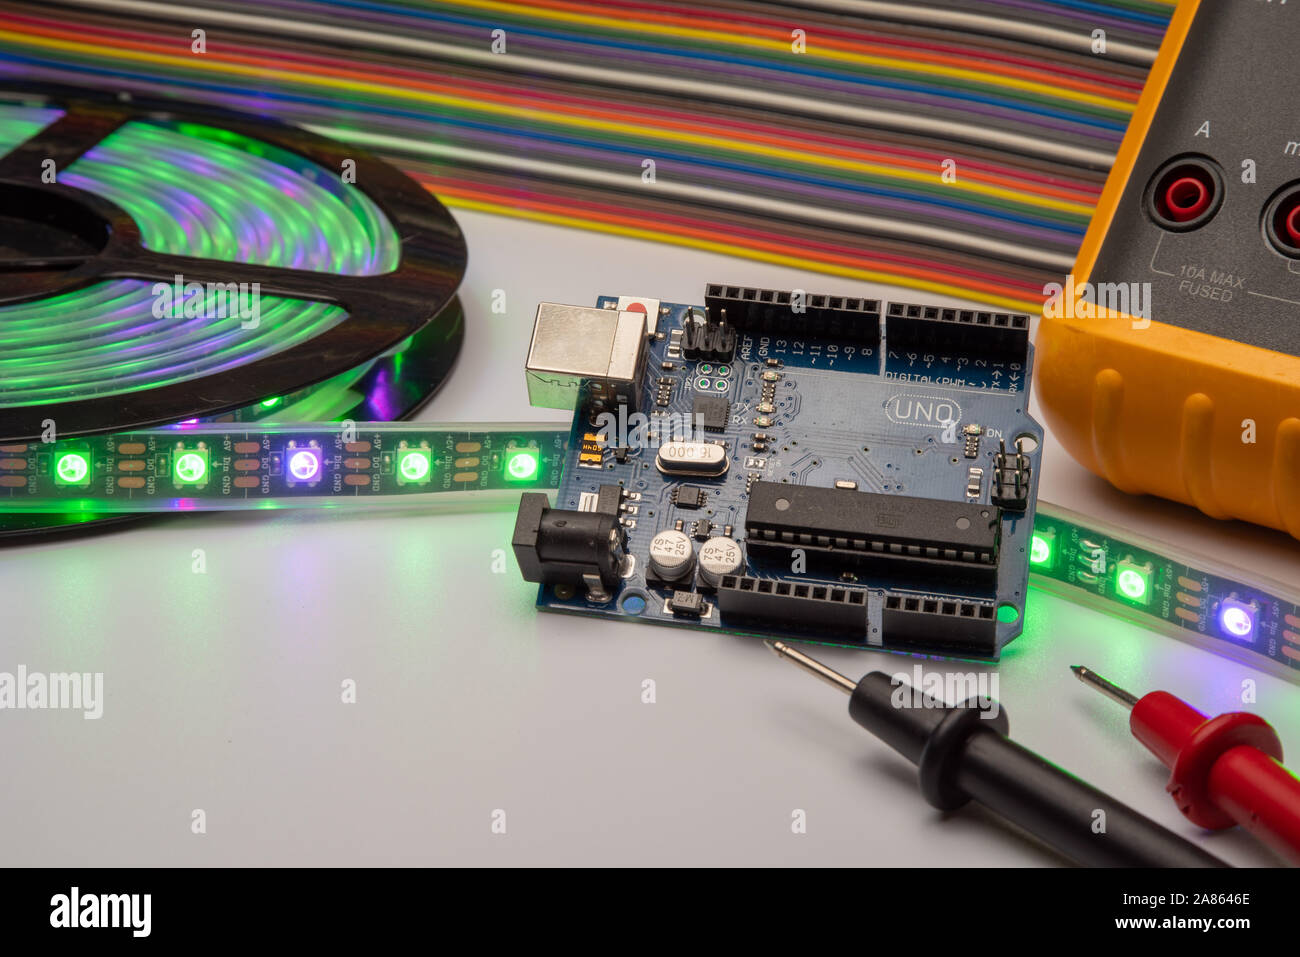 Arduino Uno displayed with LED strip, multimeter, and jumper wire background. Stock Photo